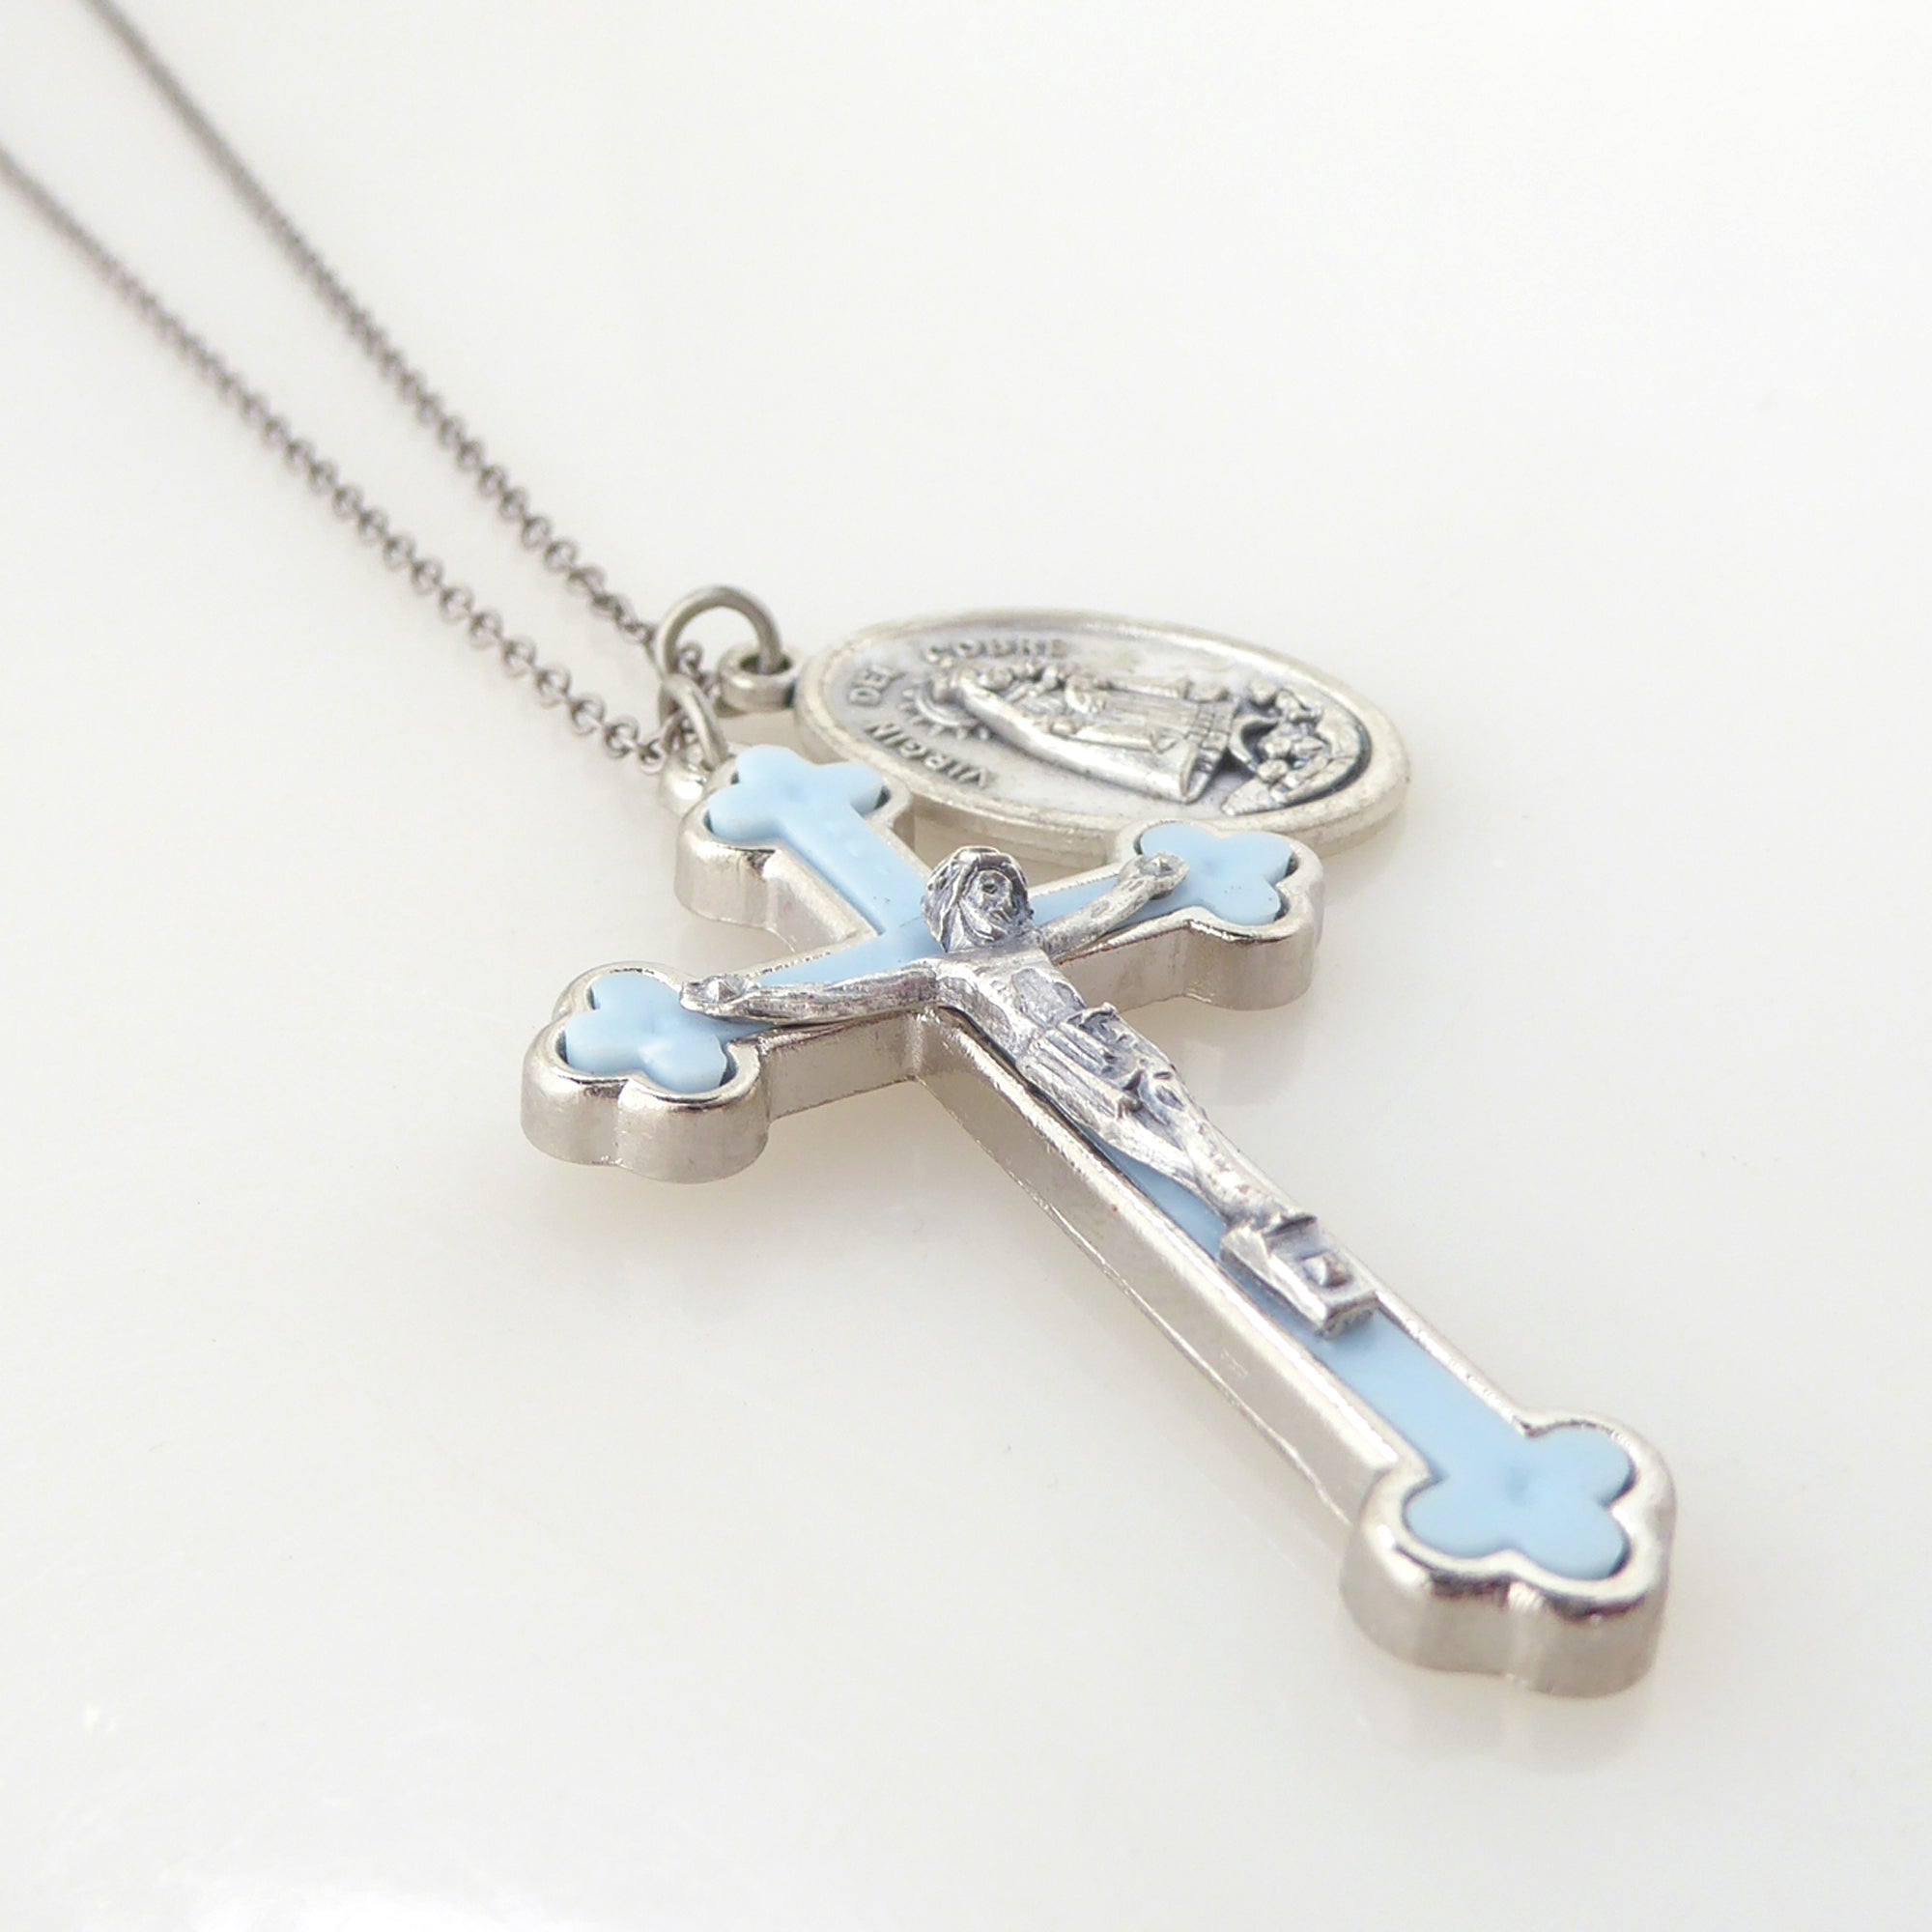 Blue crucifix and medal necklace by Jenny Dayco 2